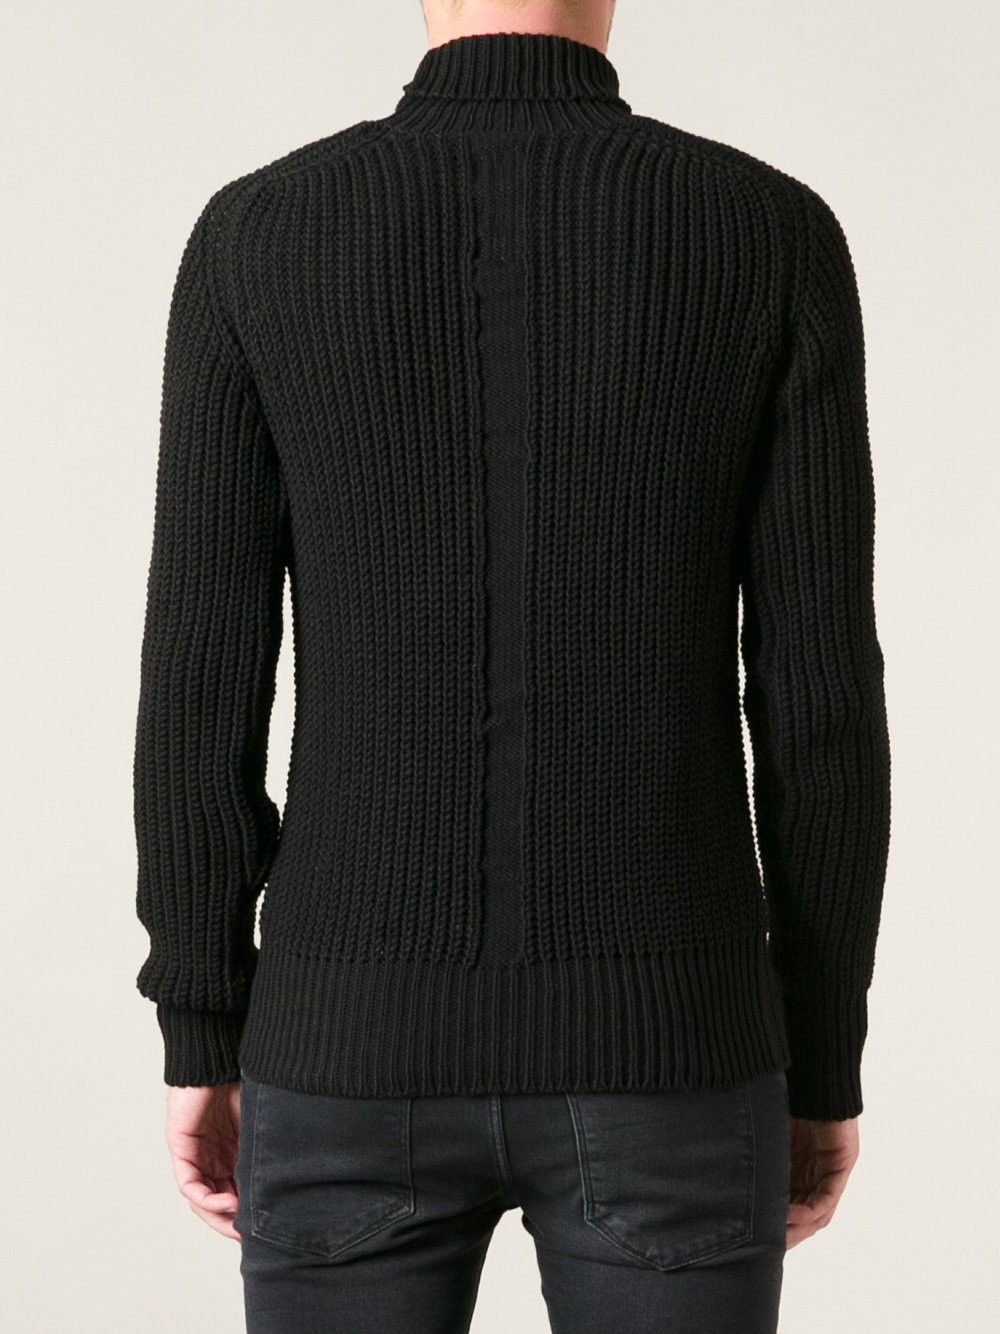 Rick Owens FW14 moody wool knit Size US M / EU 48-50 / 2 - 9 Preview